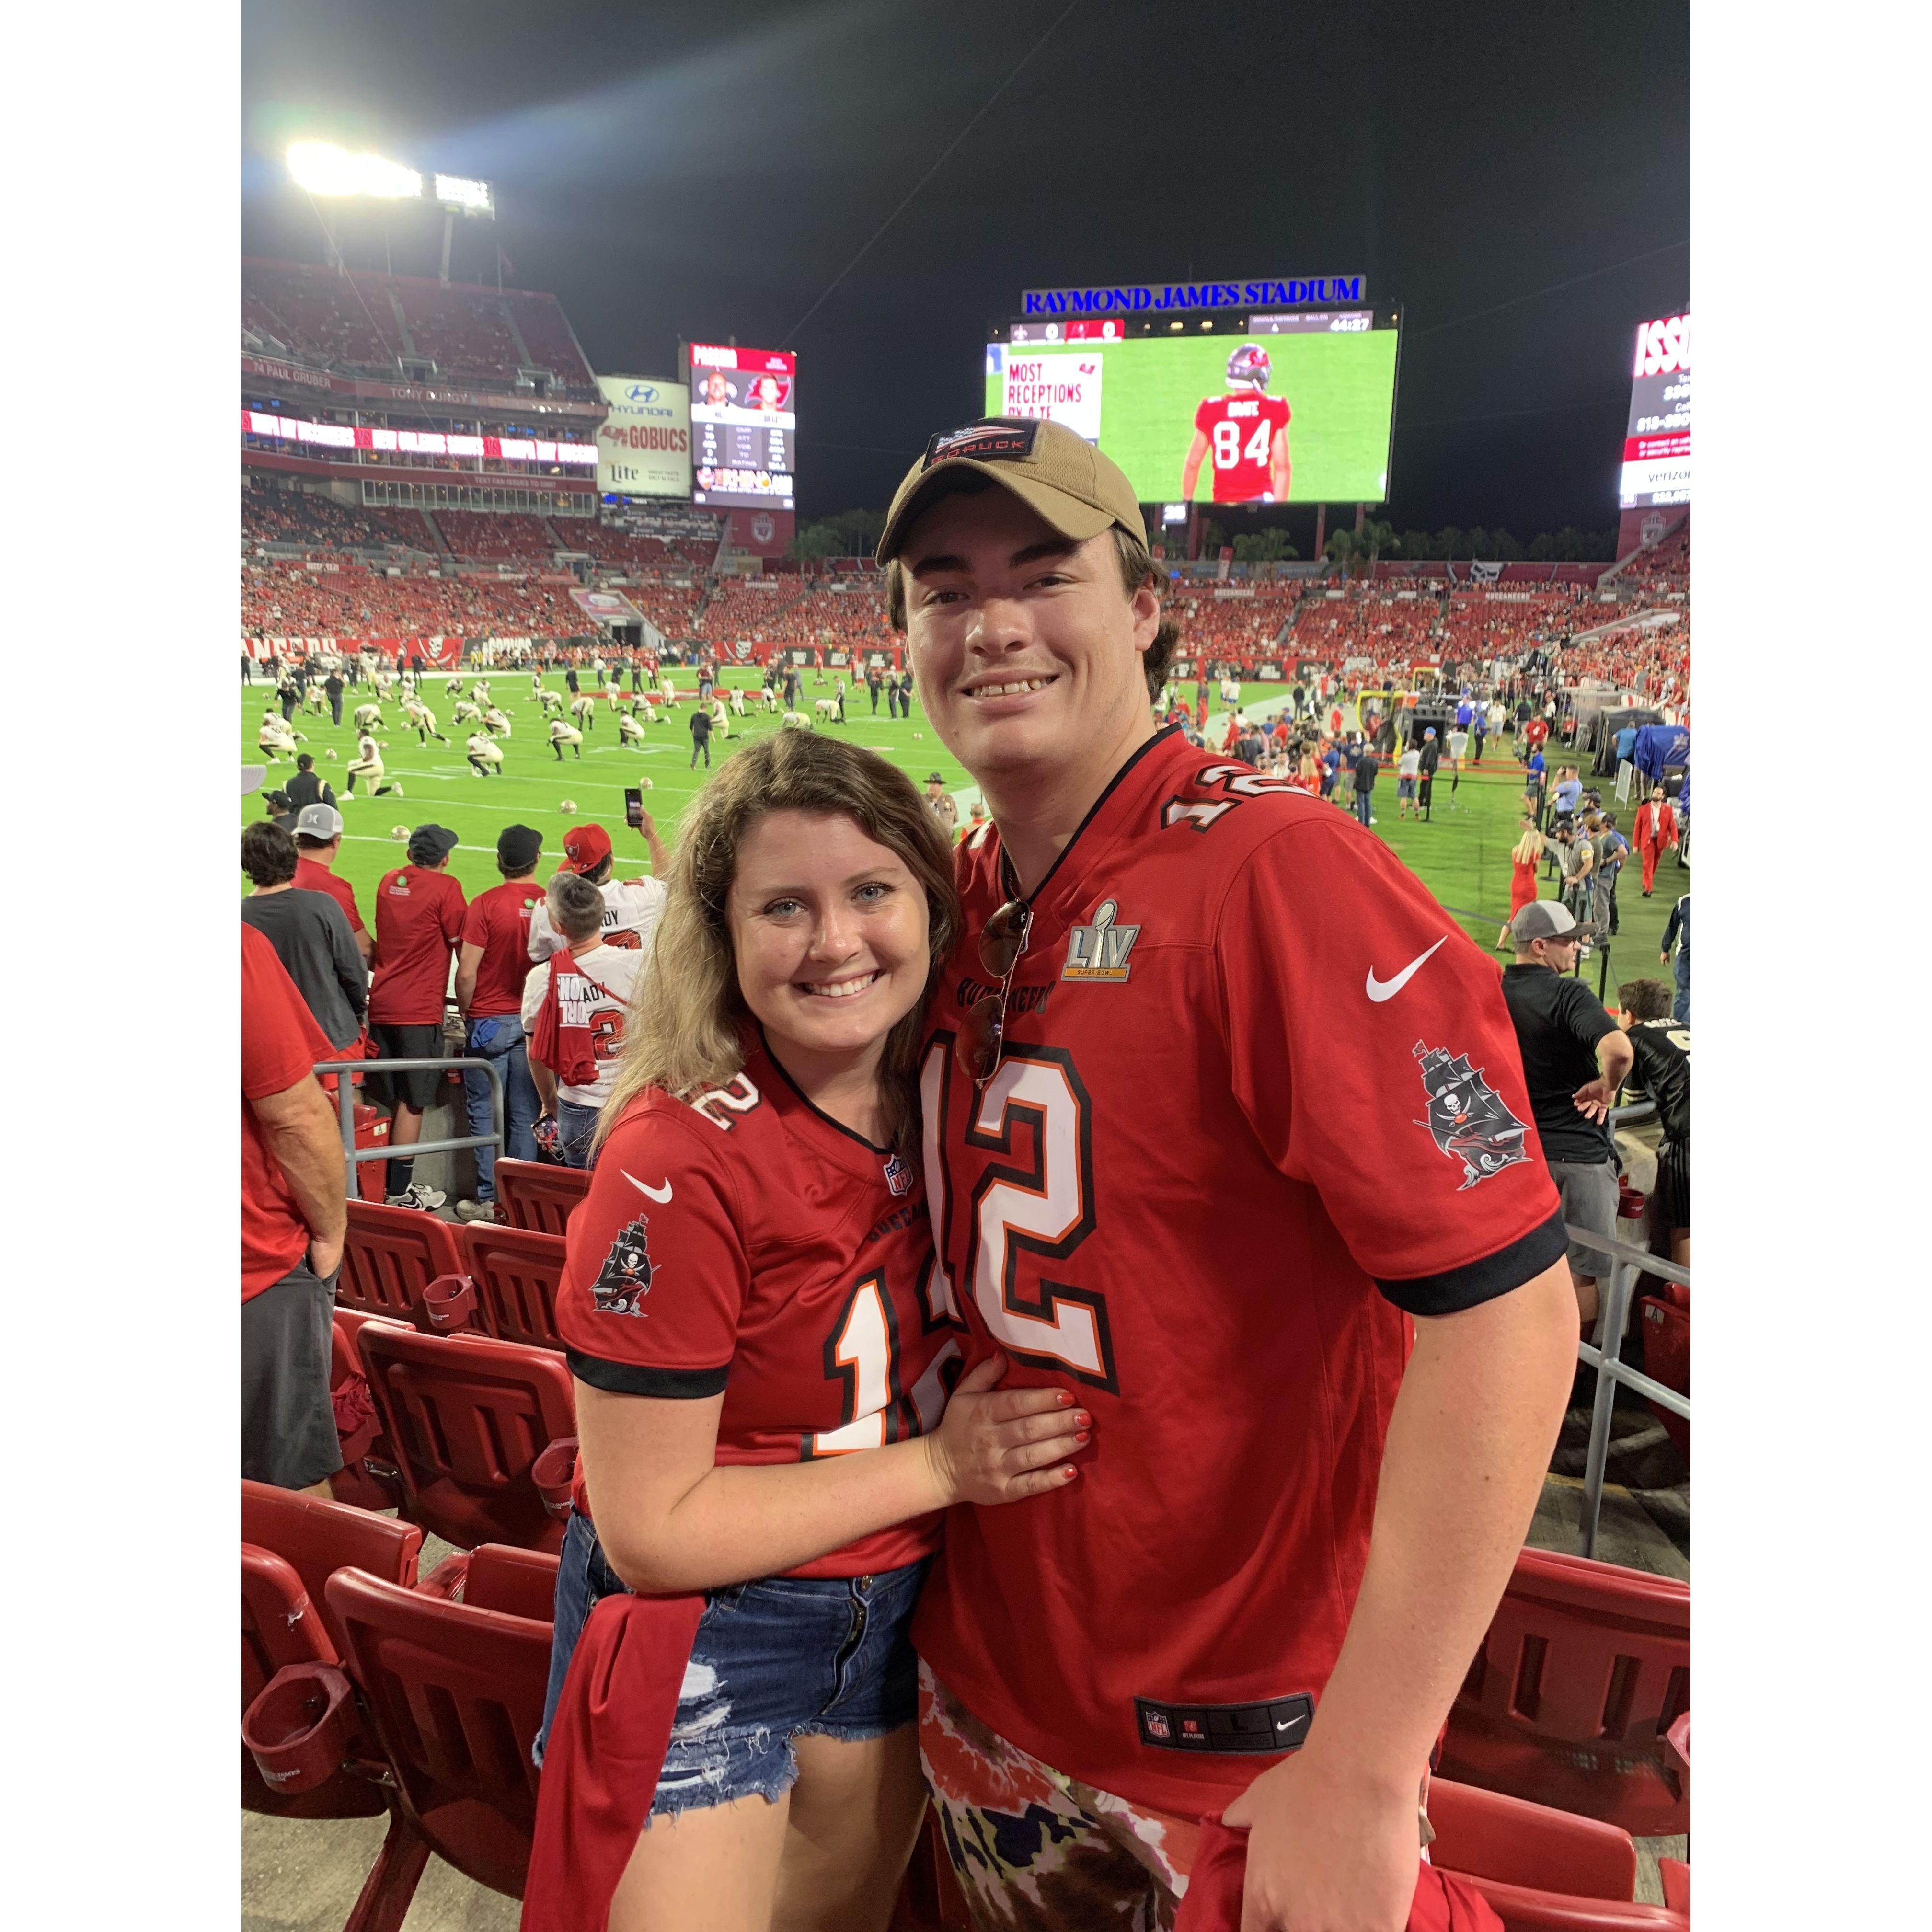 Our first NFL game!